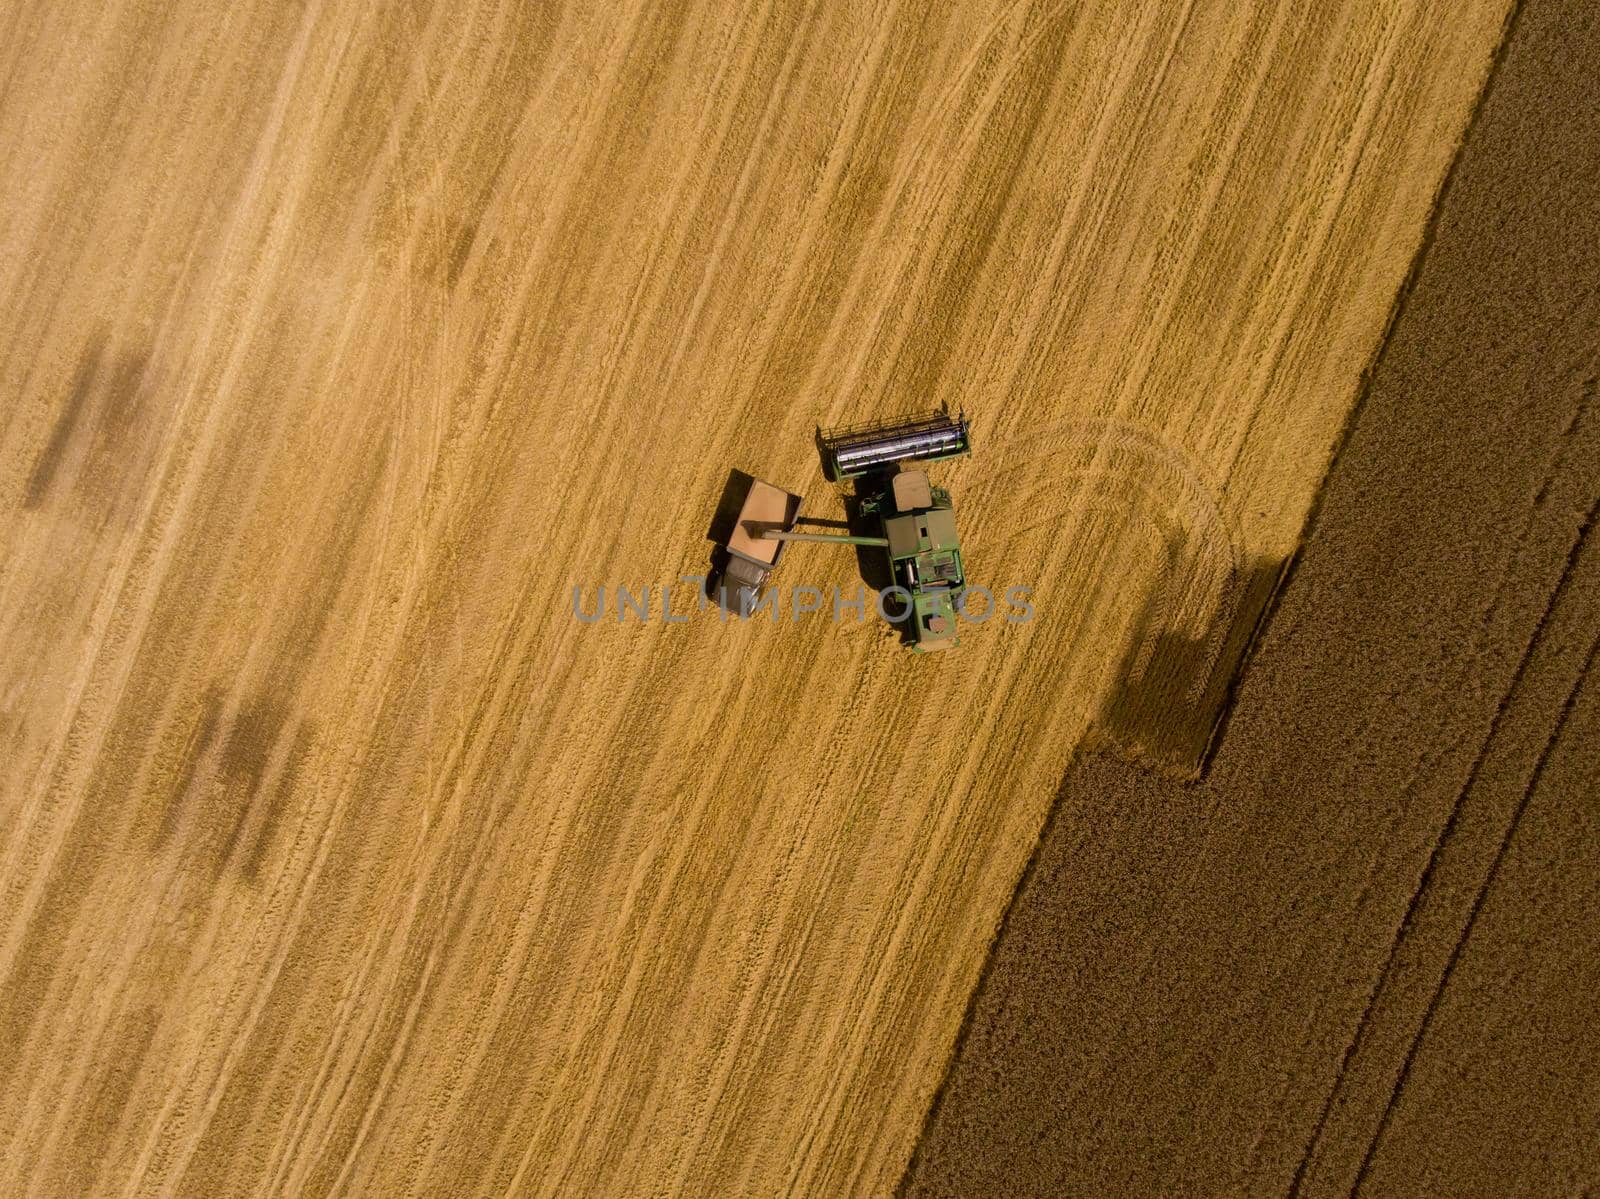 Harvester machine working in harvests wheat field. Aerial view.